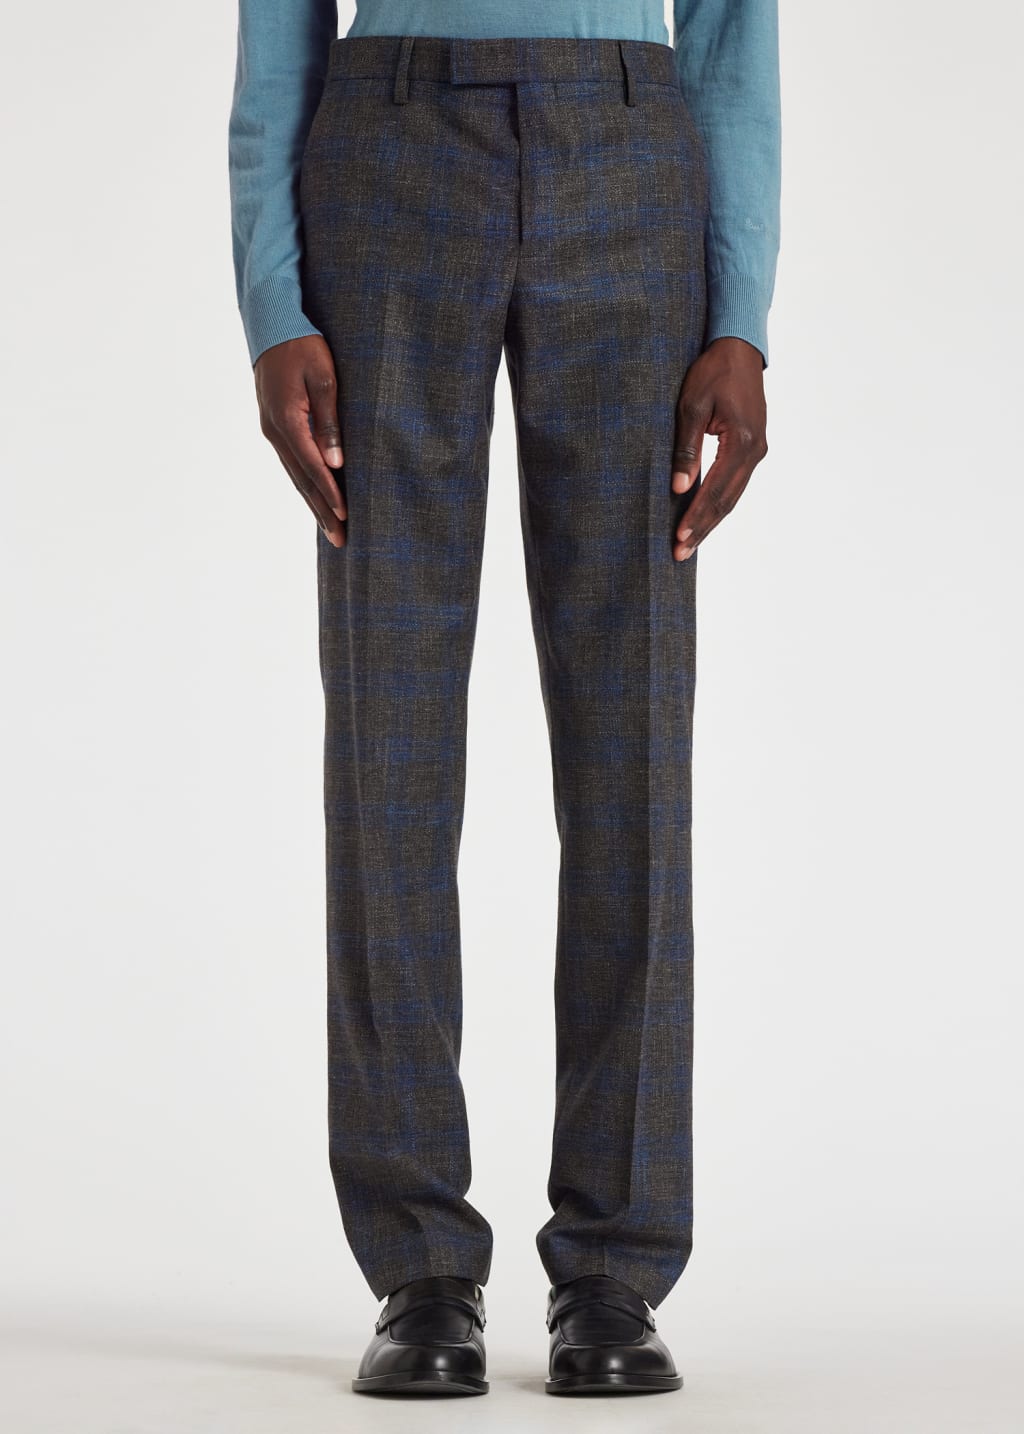 Model View - Grey and Blue Check Wool-Linen Suit by Paul Smith